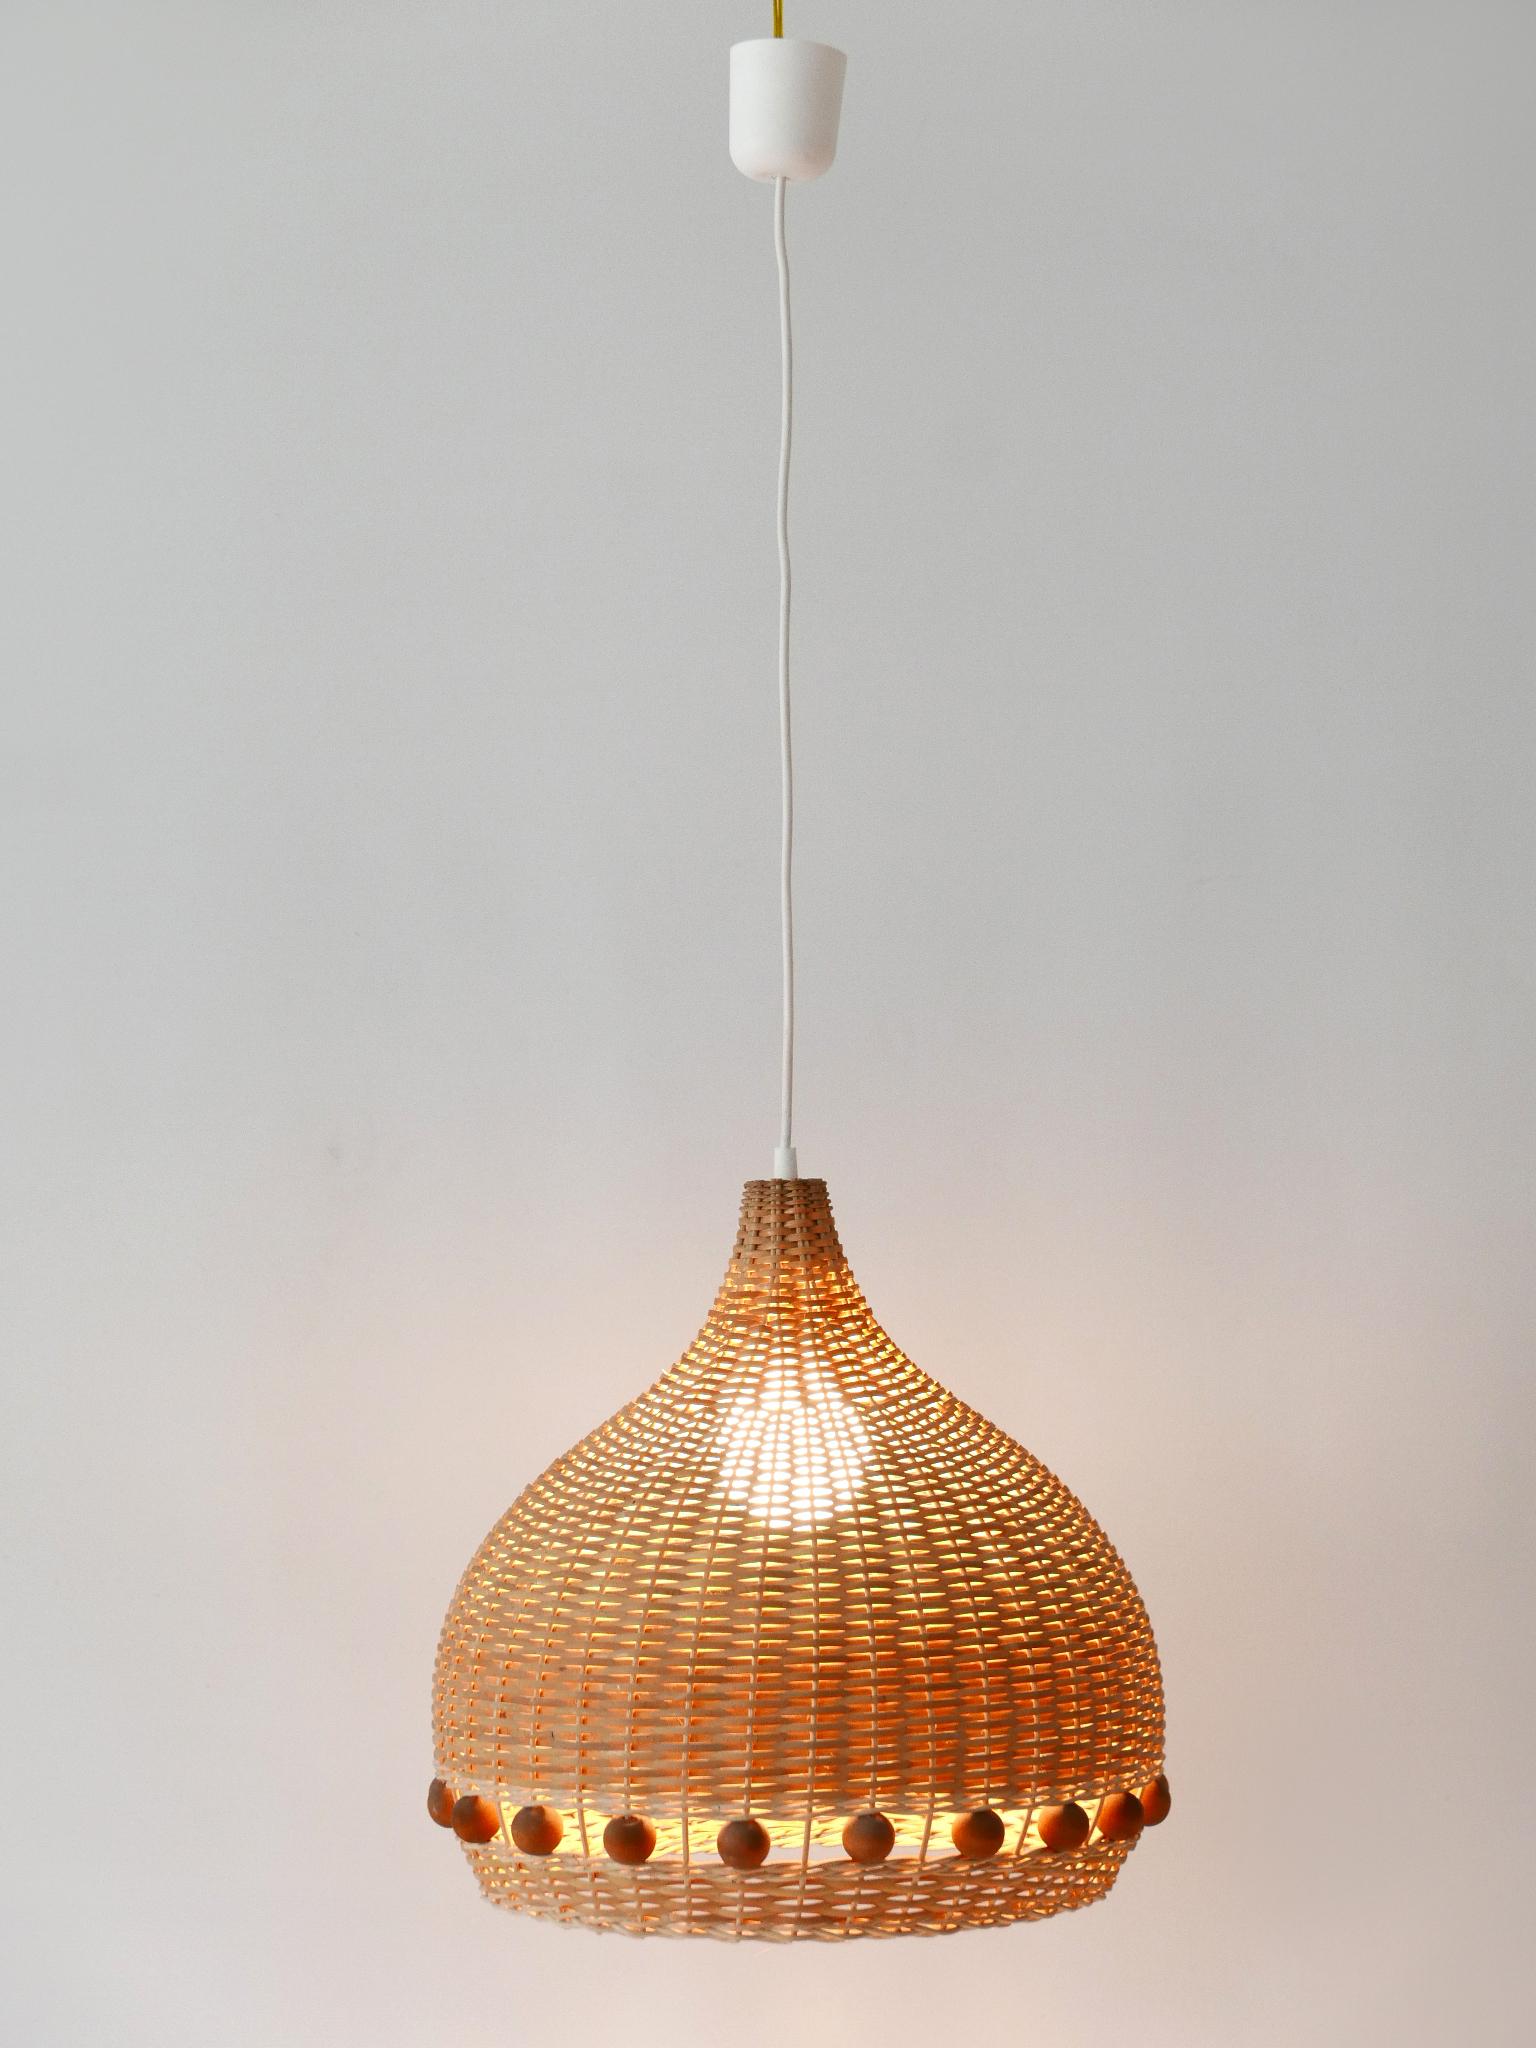 Lovely & highly decorative Mid-Century Modern rattan tulip pendant lamps or hanging lights. Designed & manufactured in Germany, 1960s.

12 identical lamps are available. Price per piece.

Executed in rattan and wood ball elements, the pendant lamp